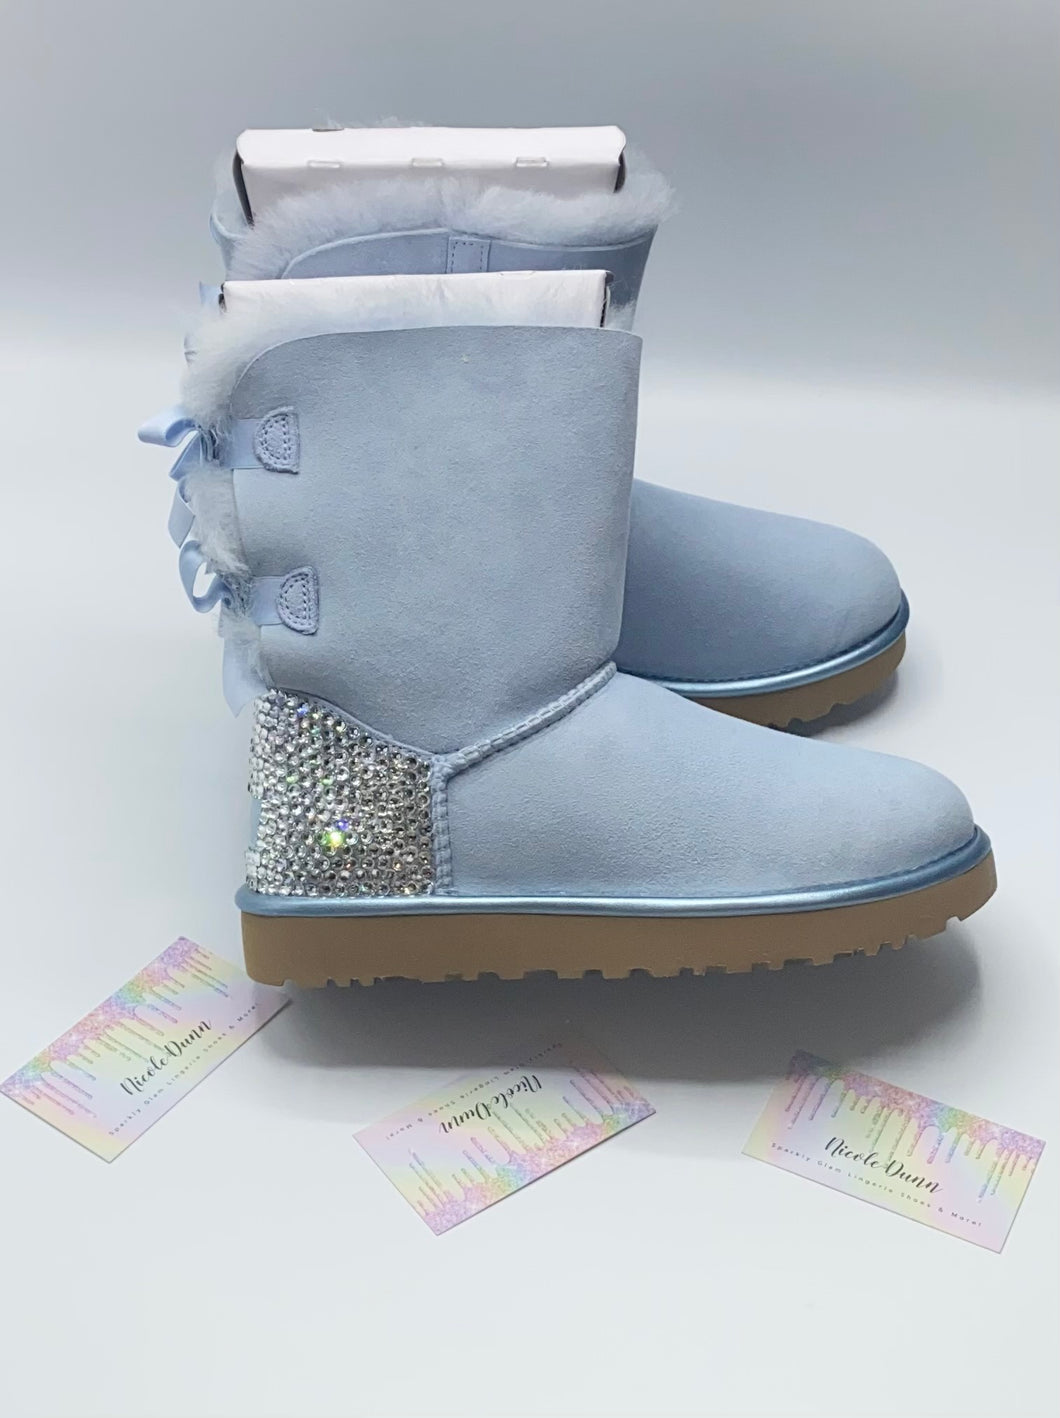 uggs baby blue